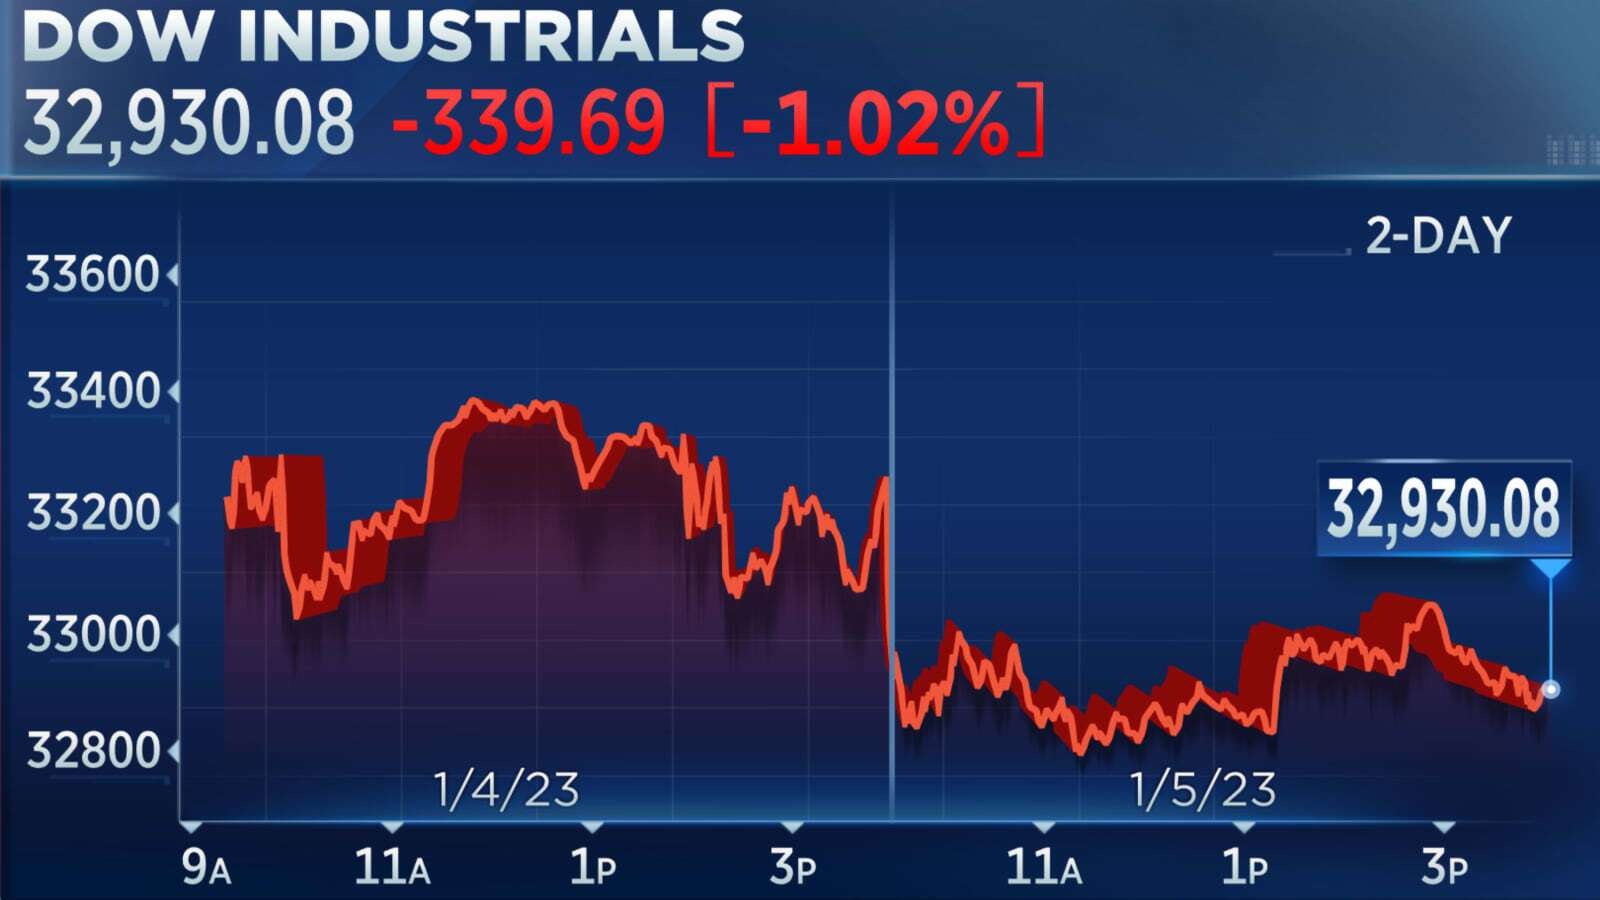 Before the Fed's rate decision, the Dow drops more than 300 points as concerns about the banking sector resurface.